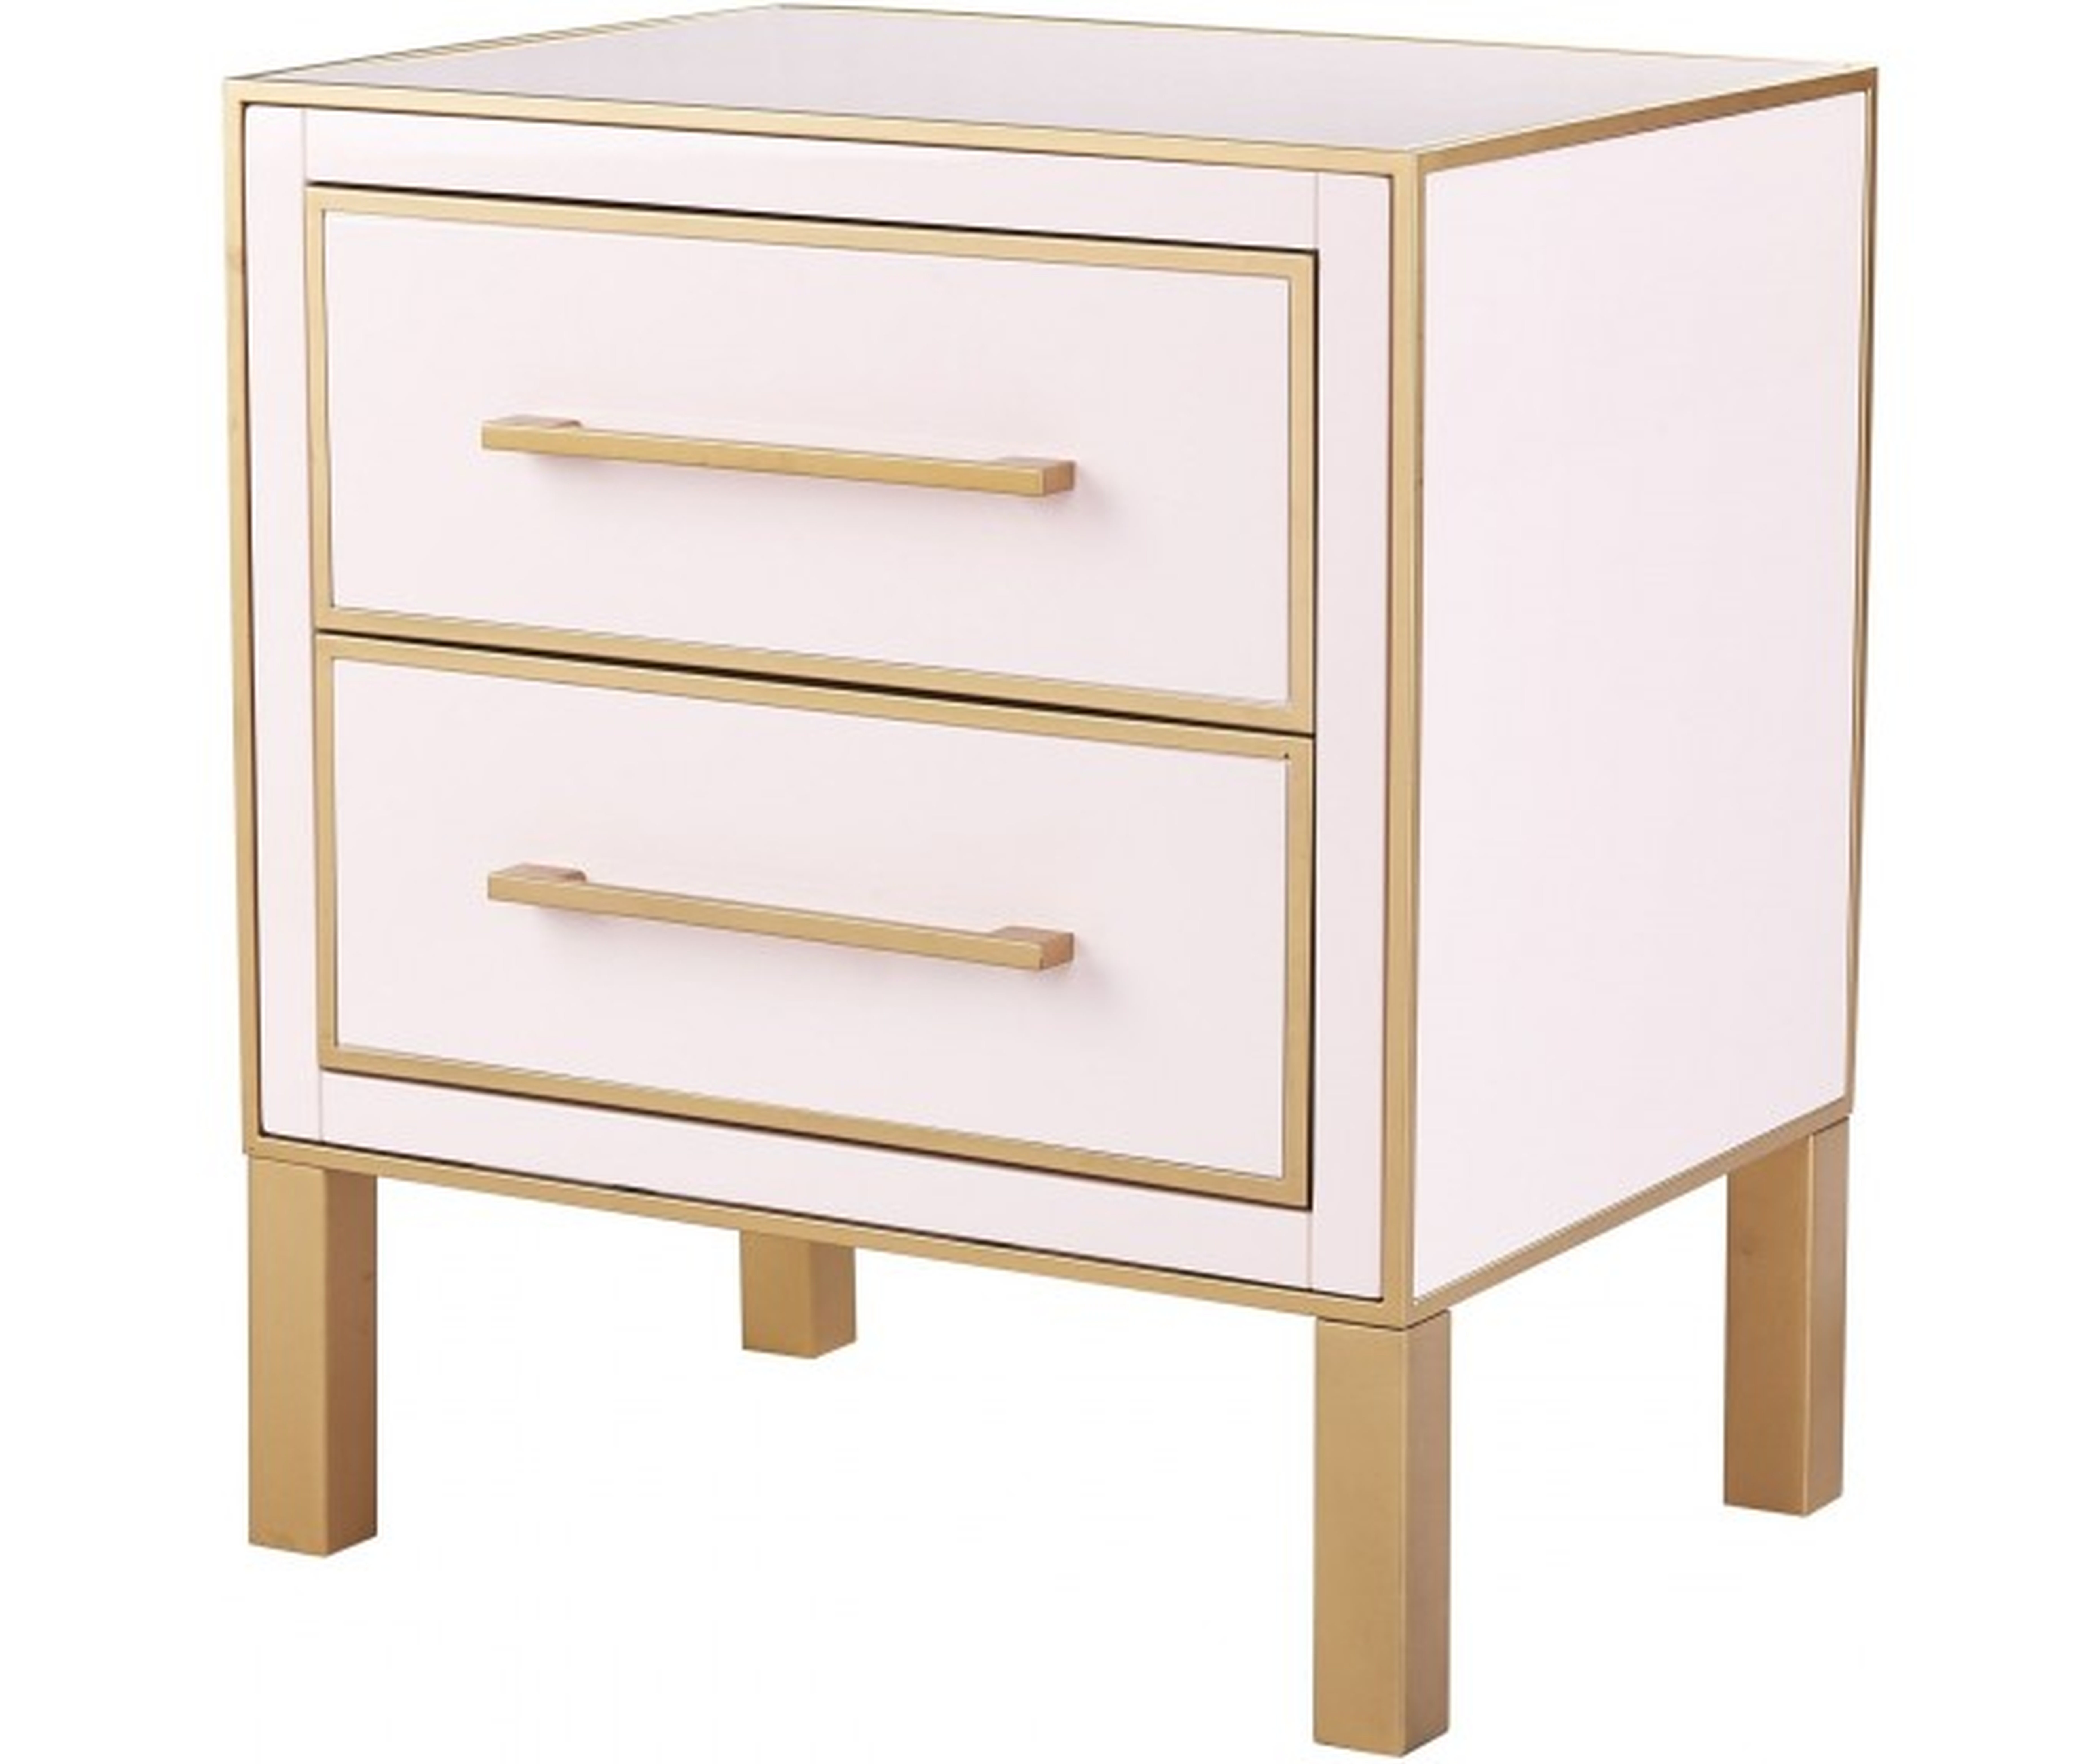 Eliza Jane Lacquer Side Table - Maren Home